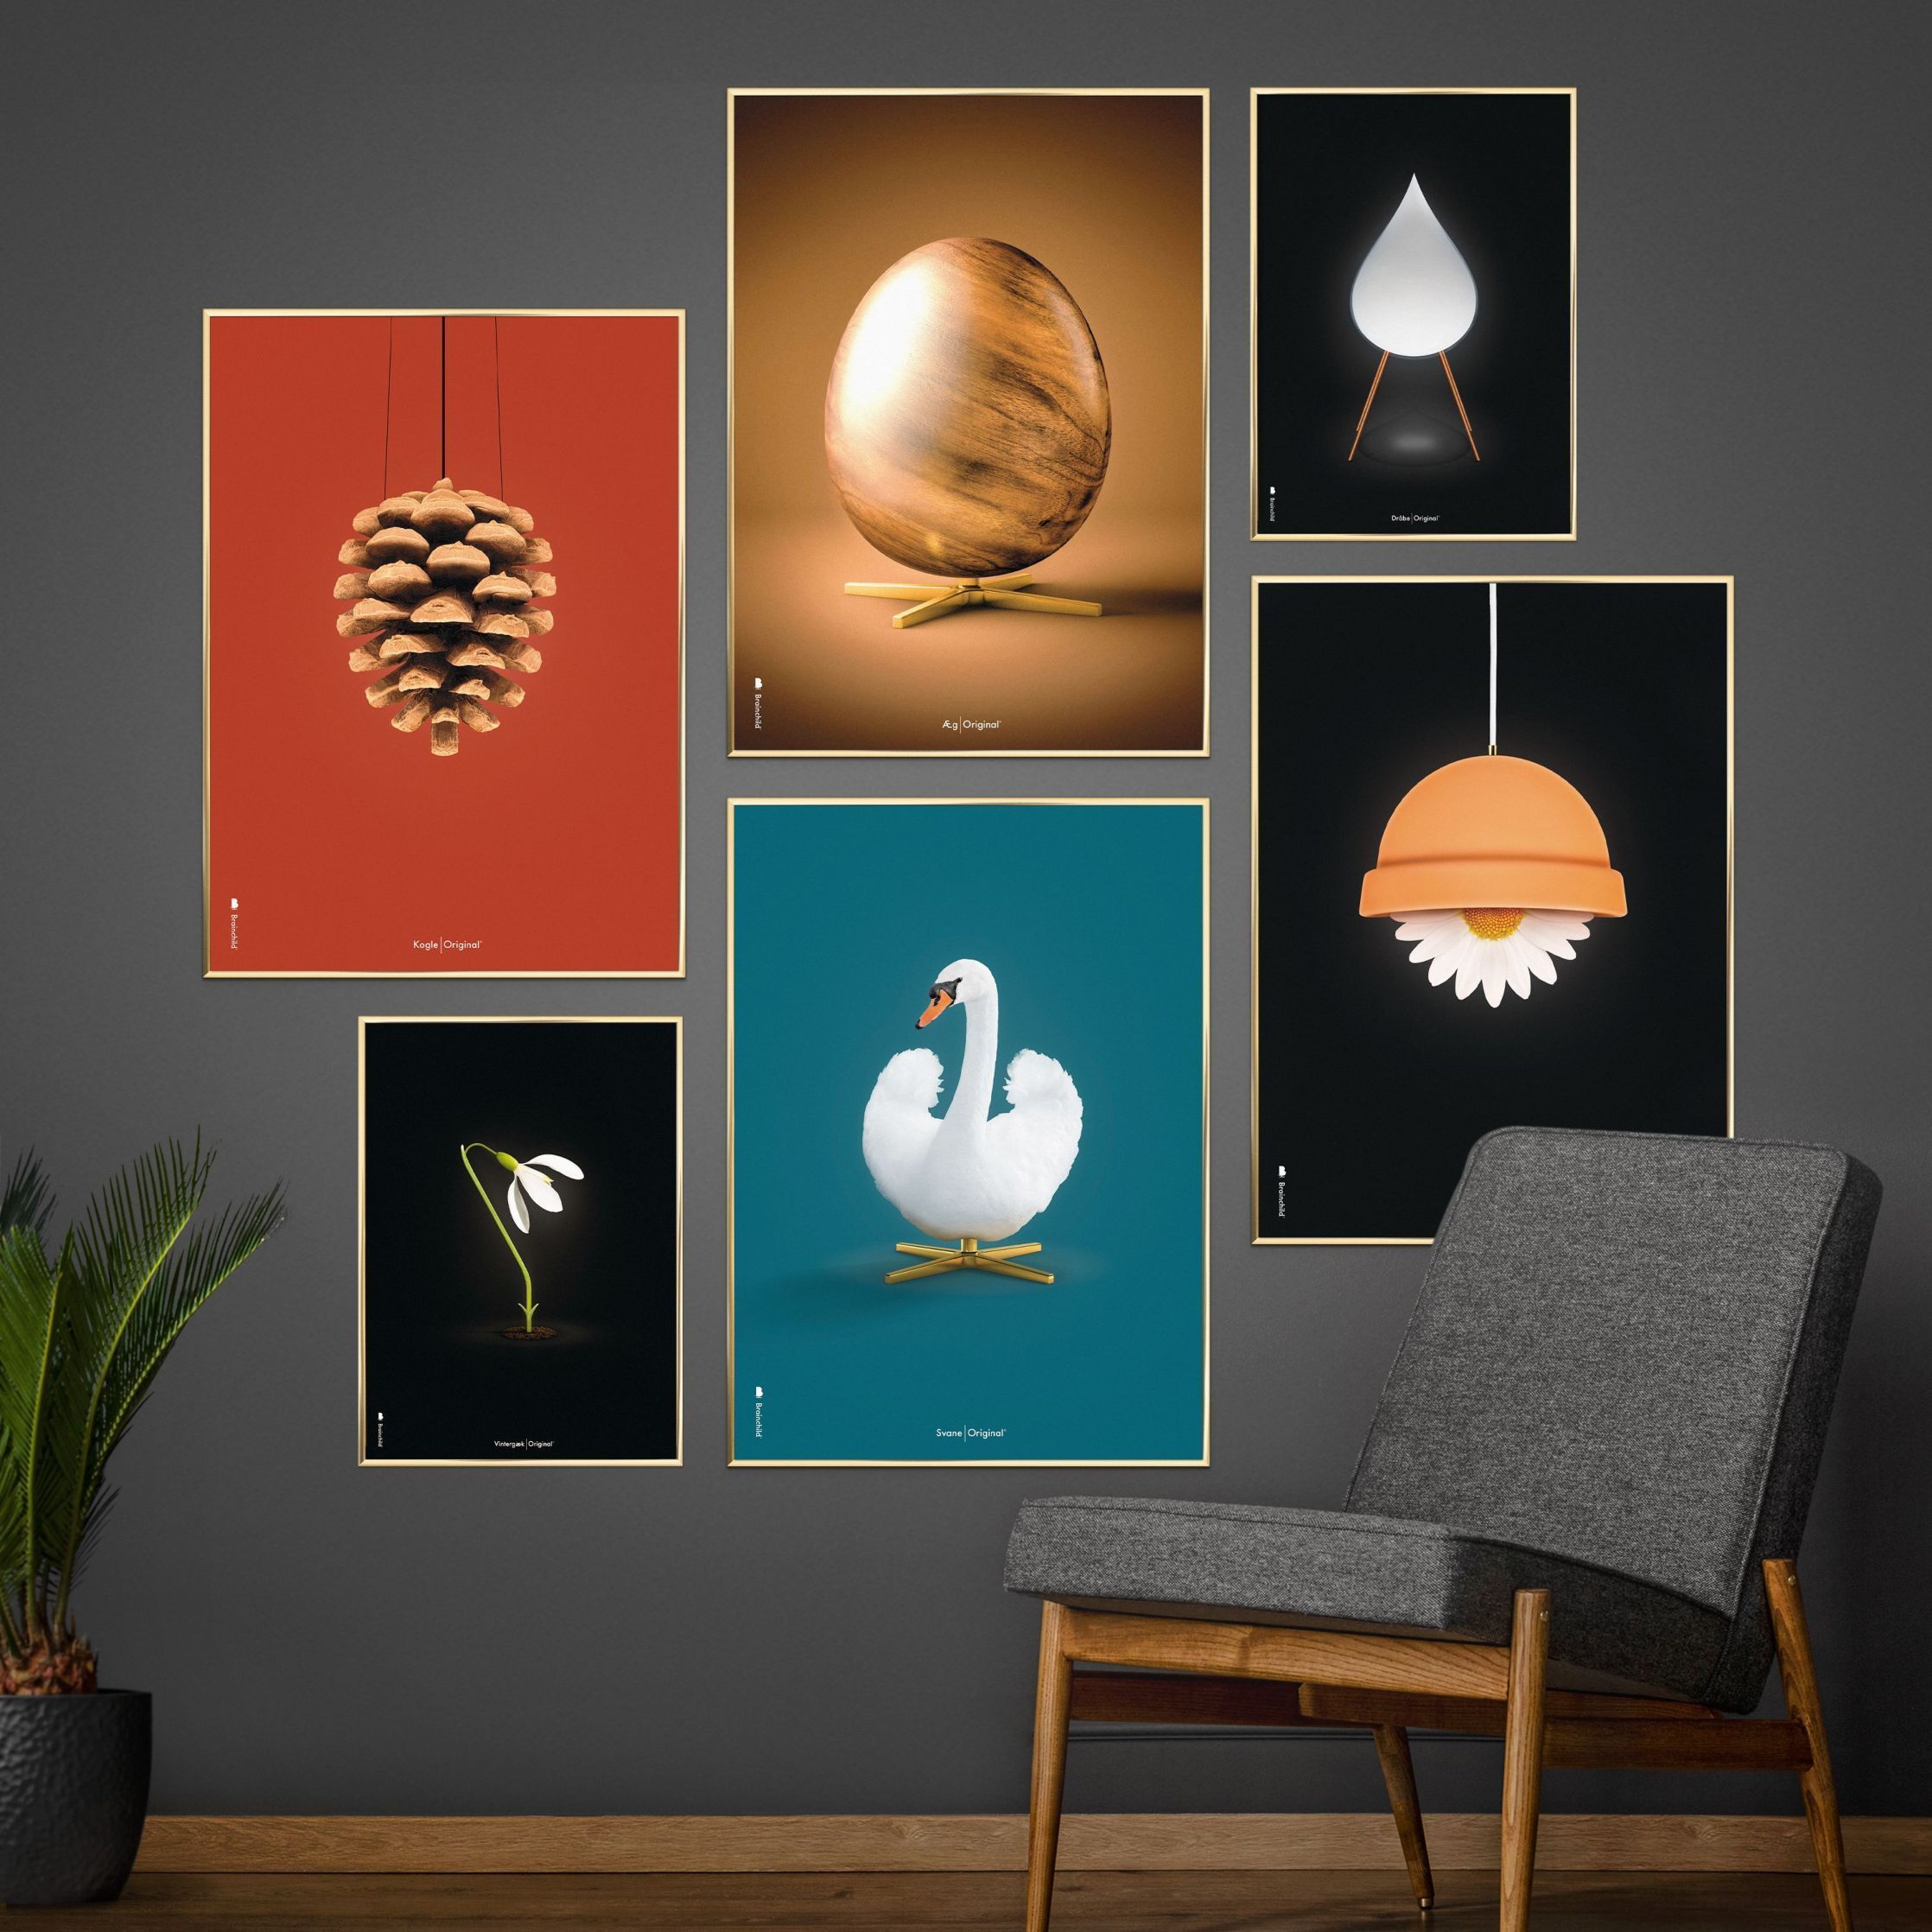 brainchild Swan Classic Poster, donker hout frame 50x70 cm, petroleumblauwe achtergrond